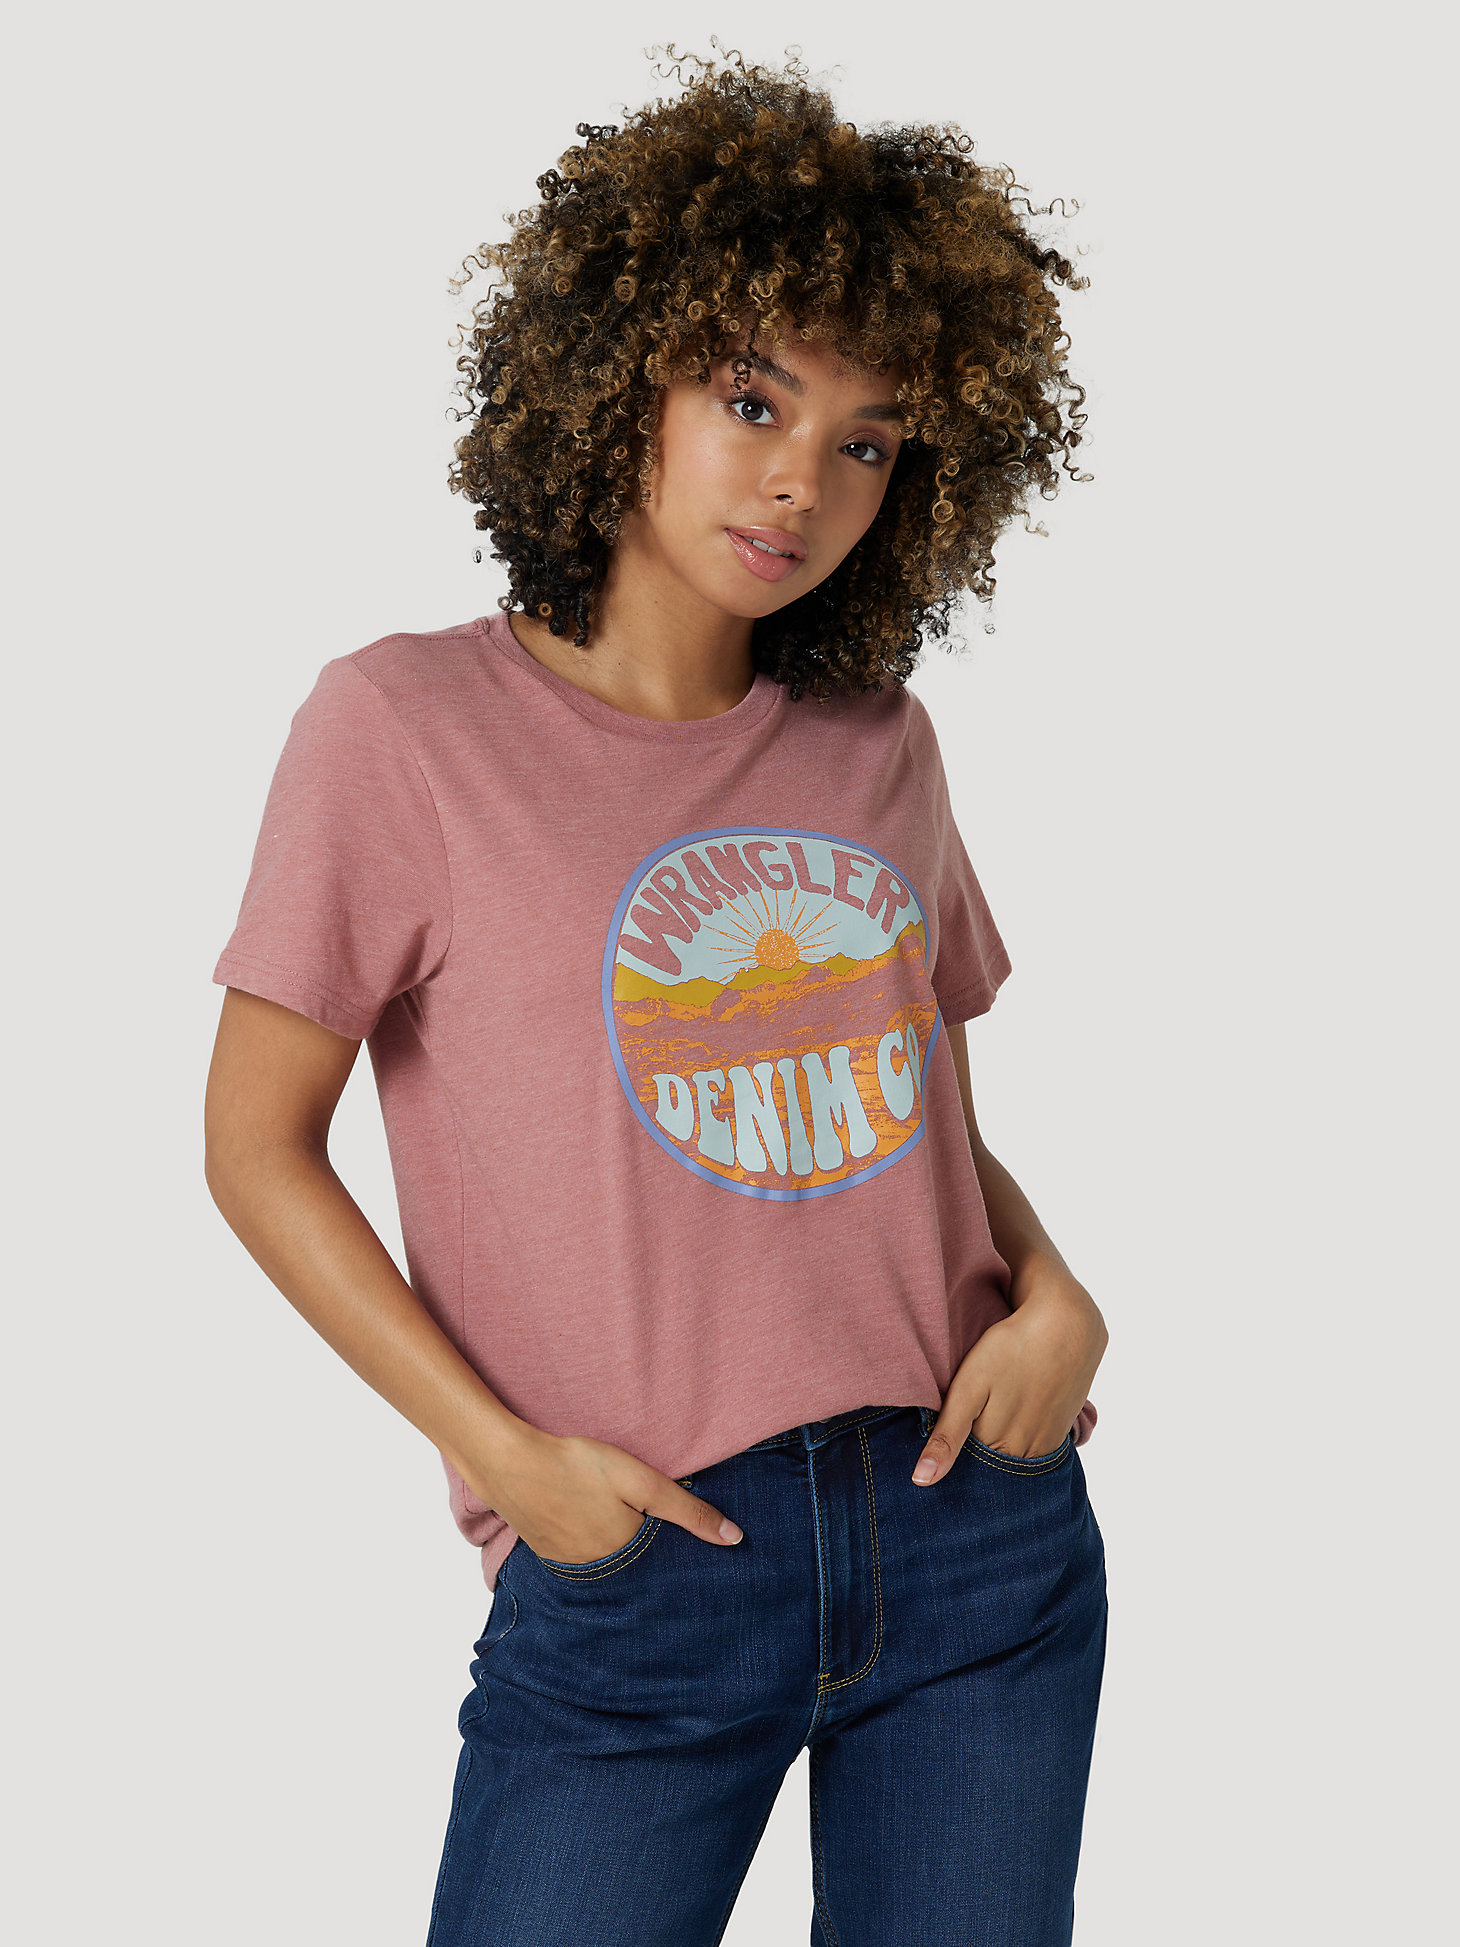 Women's Wrangler Denim Co. Tee in Whithered Rose main view